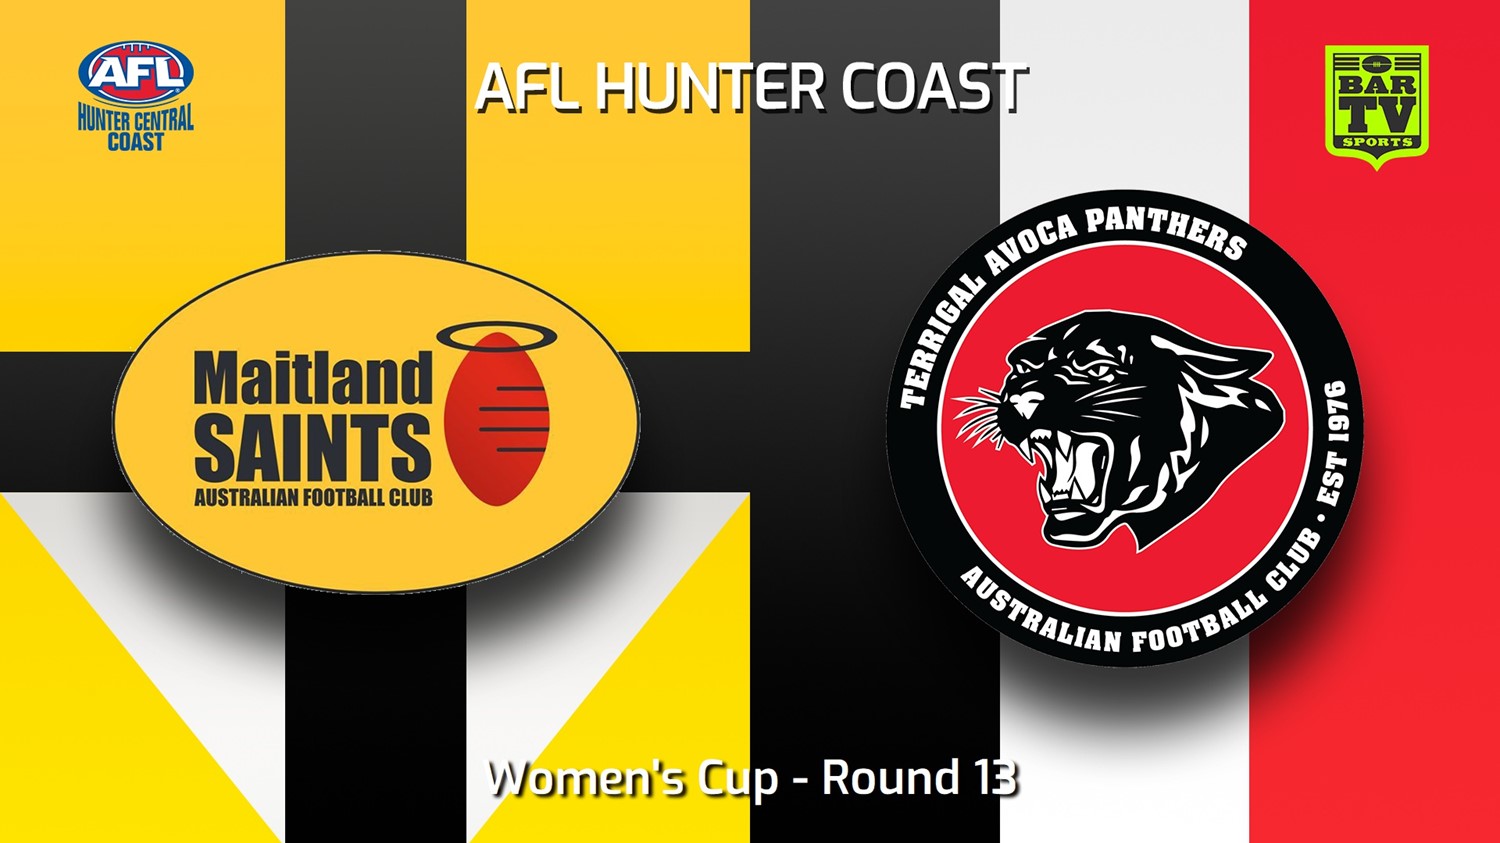 240706-video-AFL Hunter Central Coast Round 13 - Women's Cup - Maitland Saints v Terrigal Avoca Panthers Minigame Slate Image